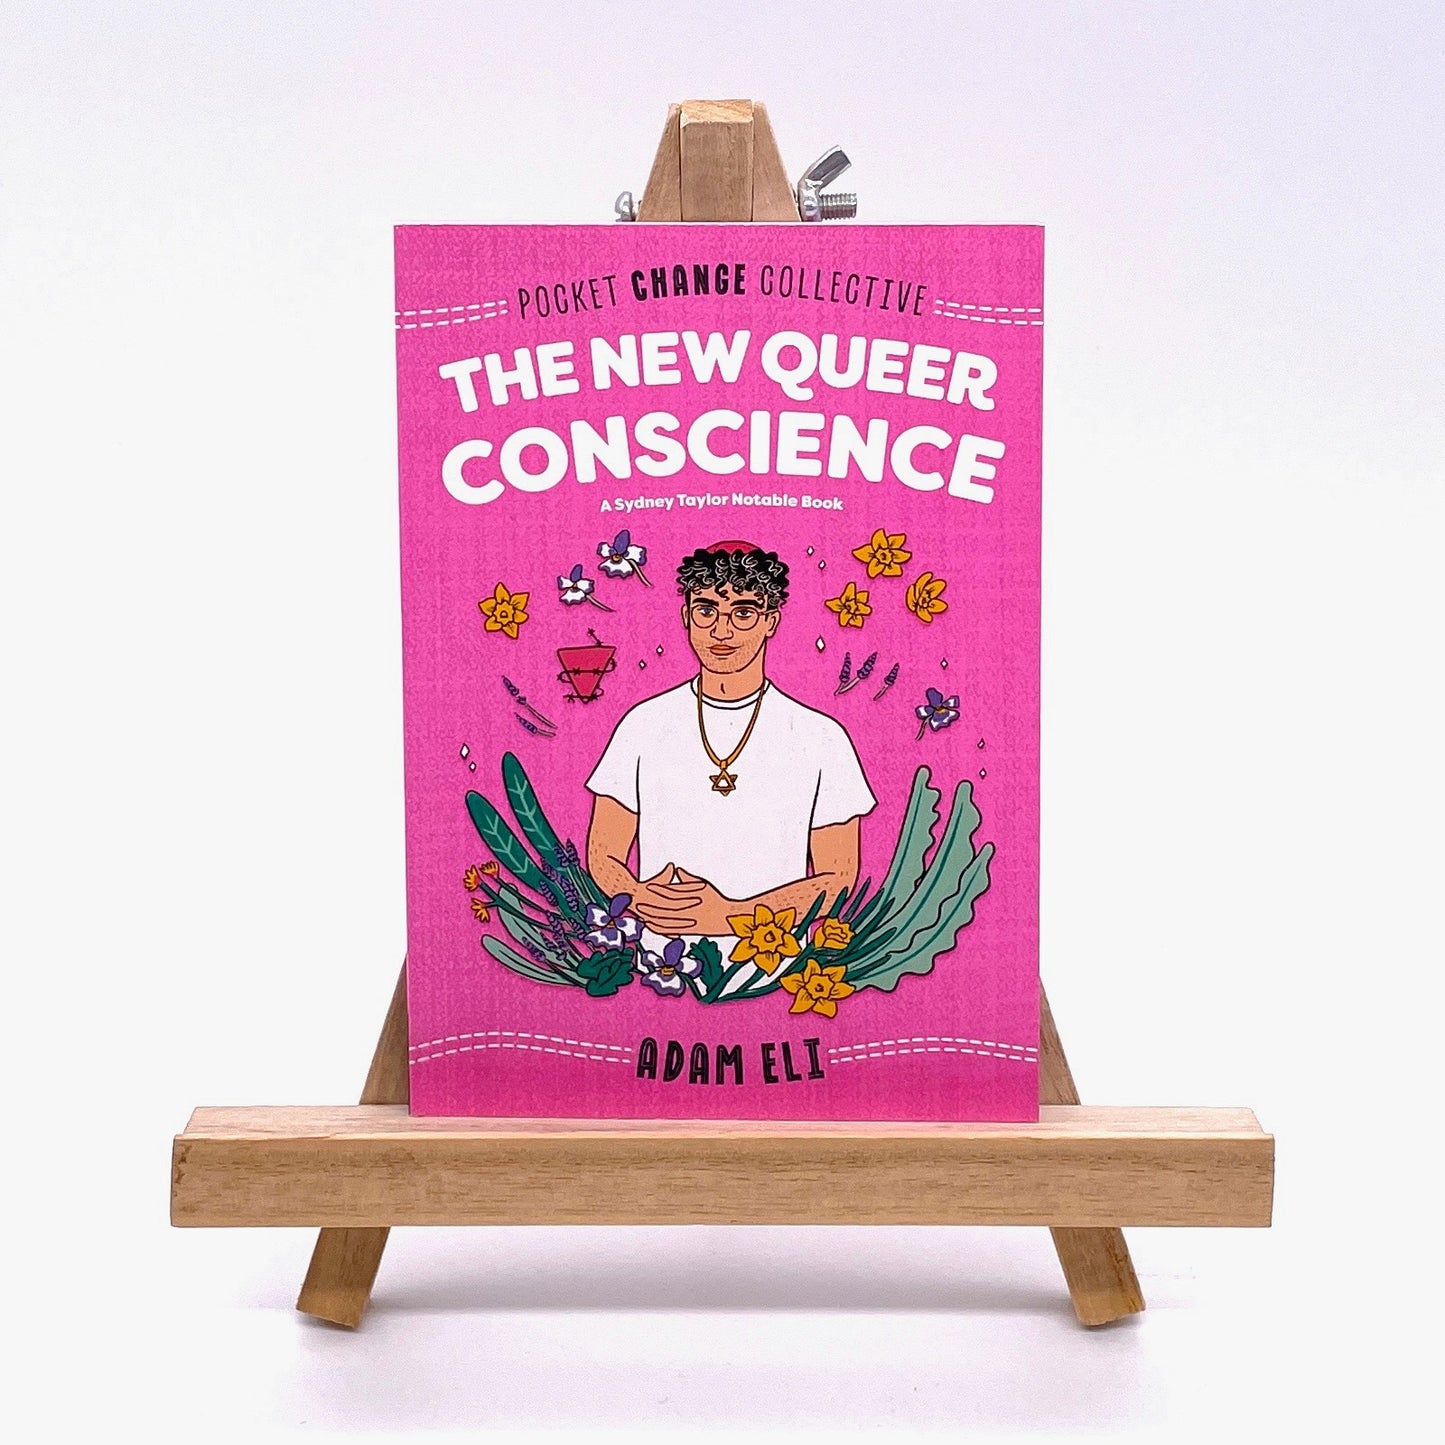 Cover of The New Queer Conscience by Adam Eli. There's a hand drawn image of the author, a queer person wearing a star of David necklace, set against a floral backdrop.